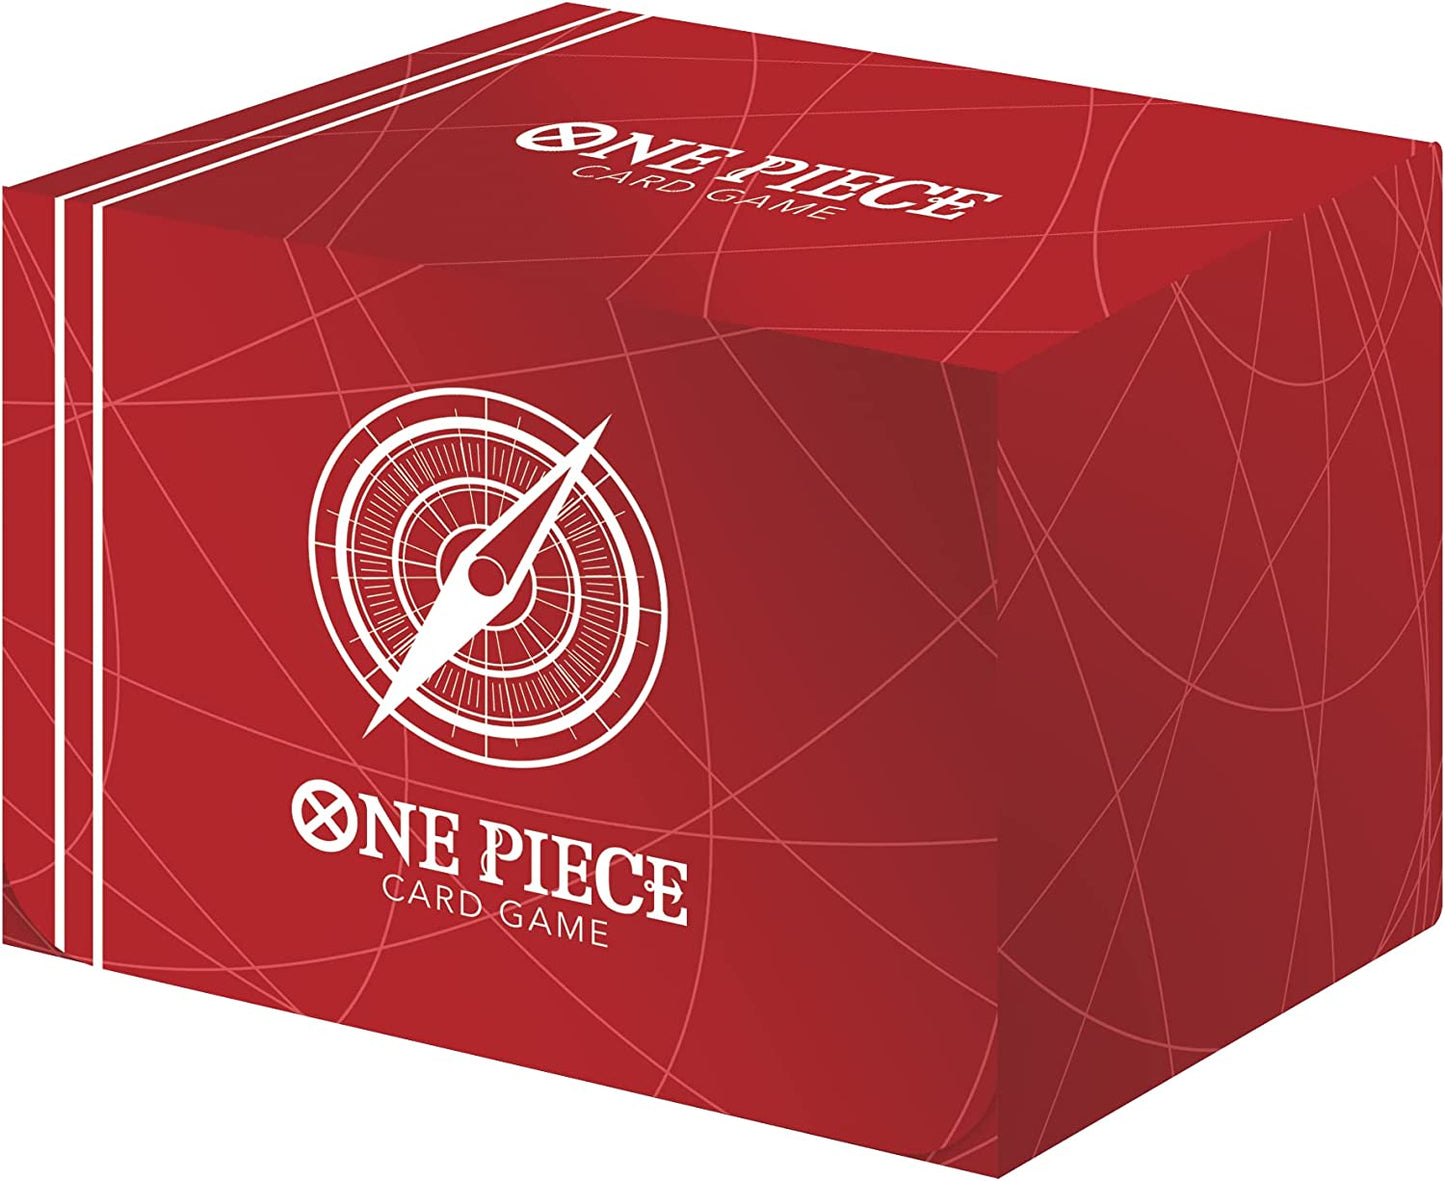 One Piece - Bandai Card Game Red Case